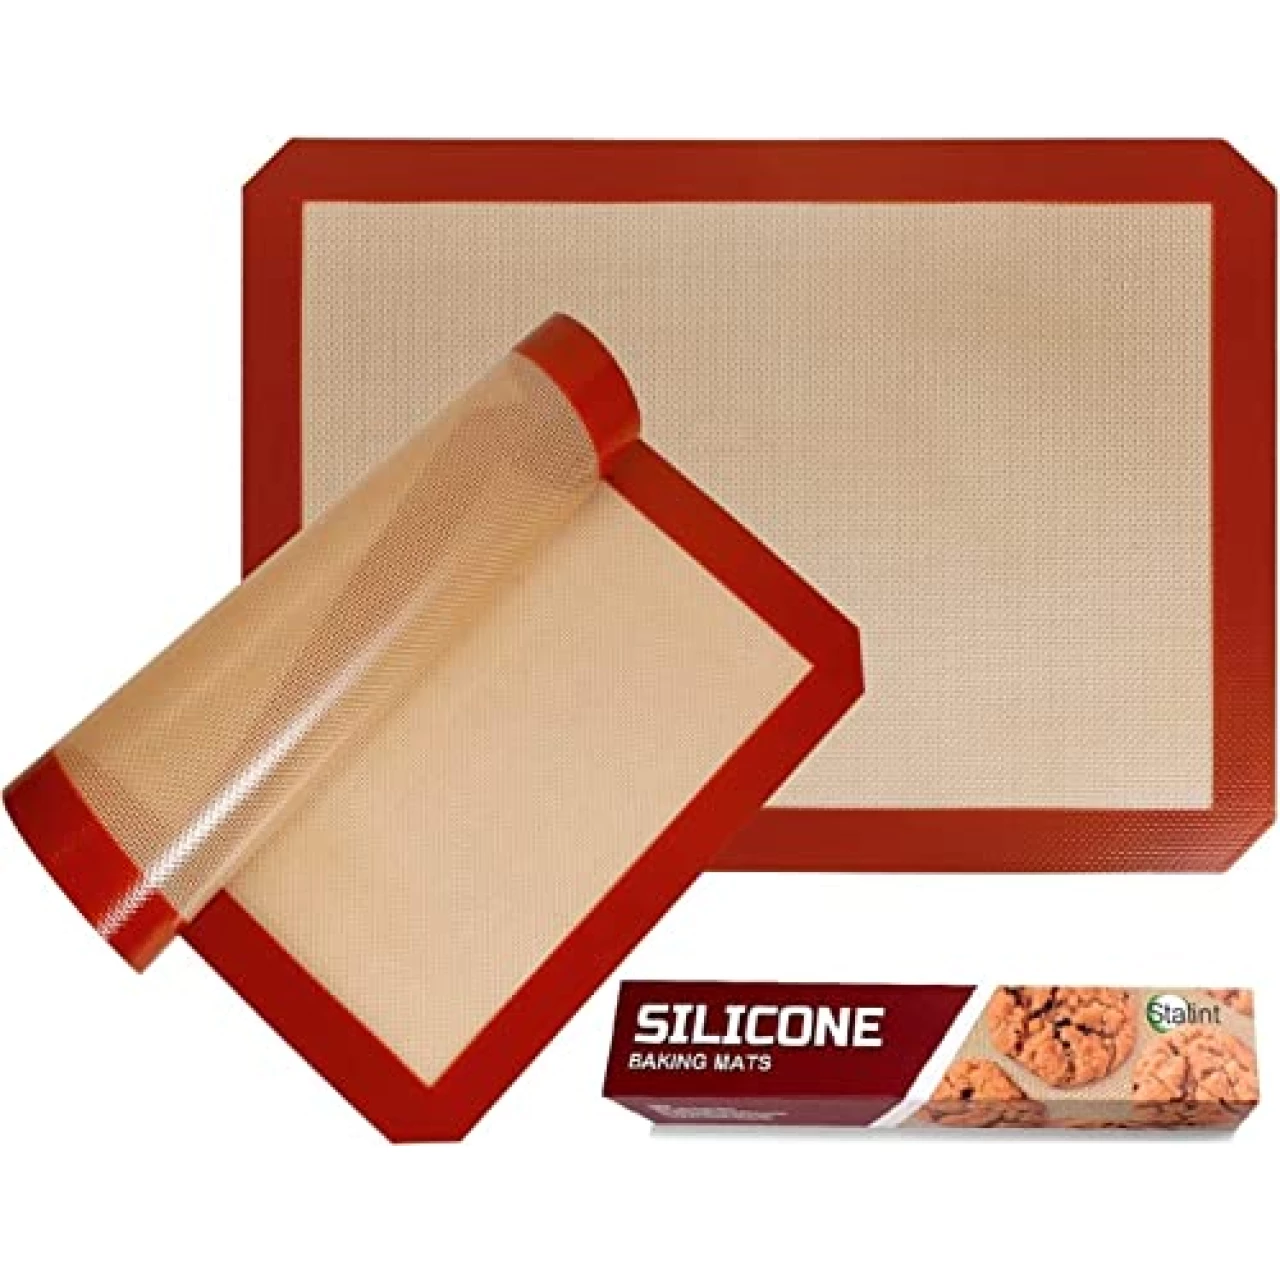 STATINT Non-Stick Silicone Baking Mat, Premium Food Safe - Pack of 2, for Cookie Oven Reusable Mat